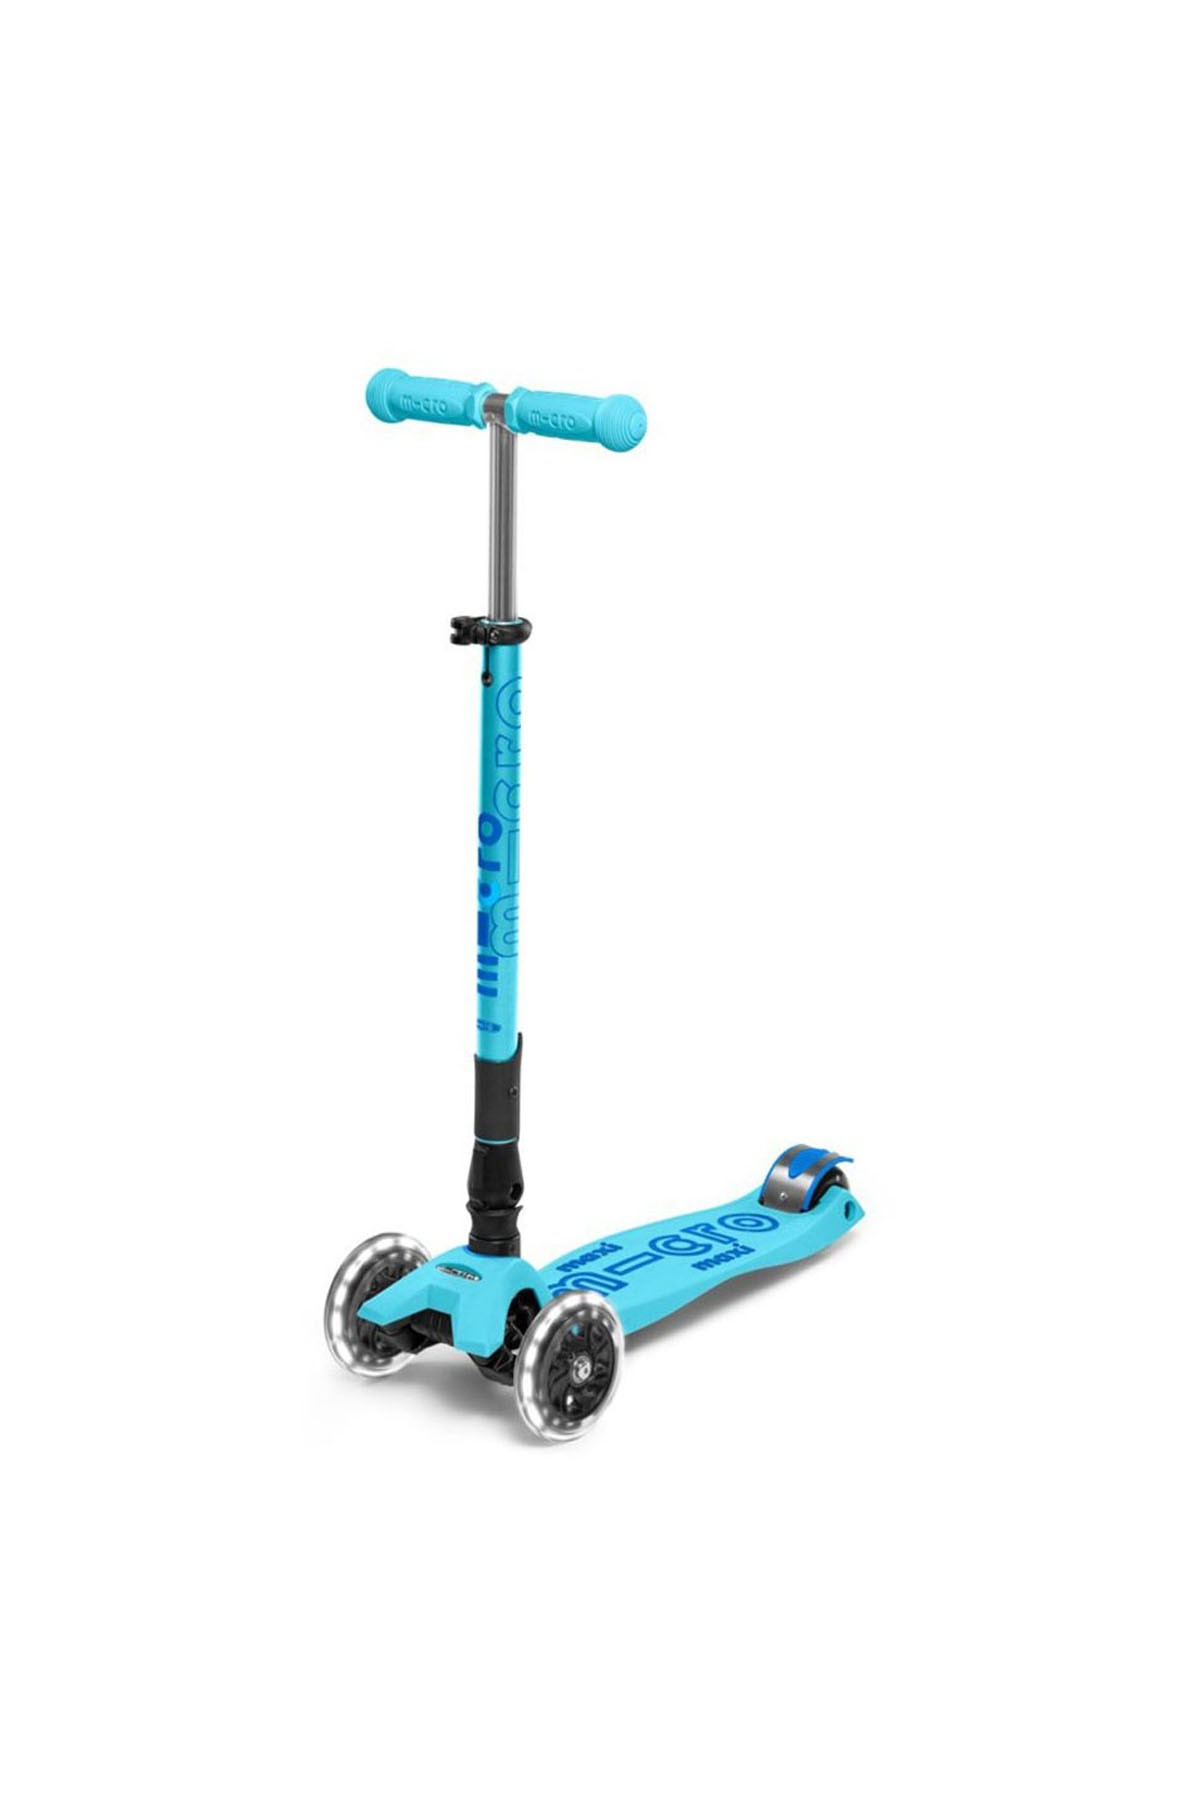 Maxi Micro Scooter Deluxe Foldable LED Bright Blue